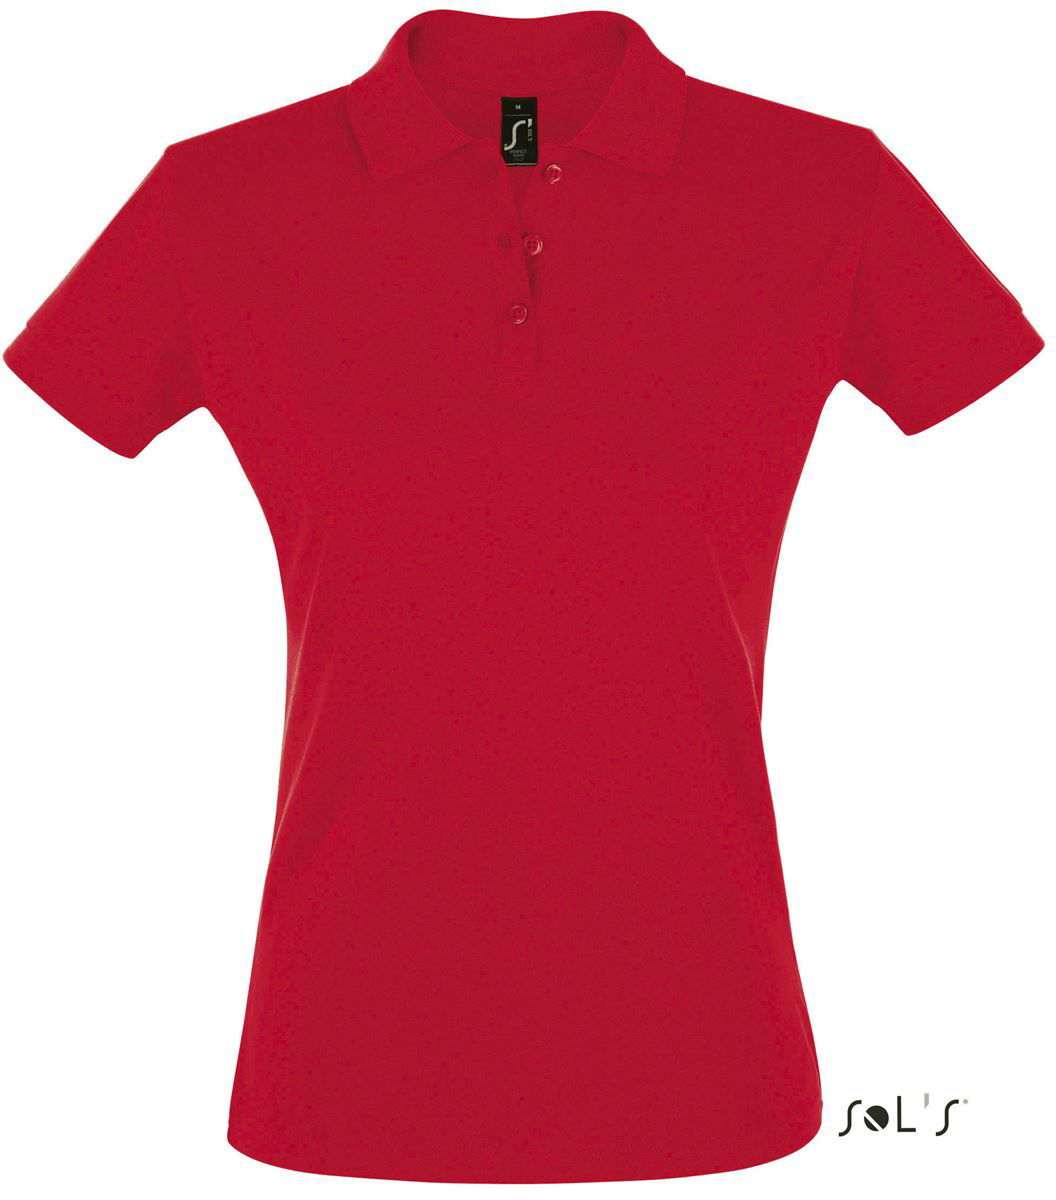 Sol's Perfect Women - Polo Shirt - Sol's Perfect Women - Polo Shirt - Red